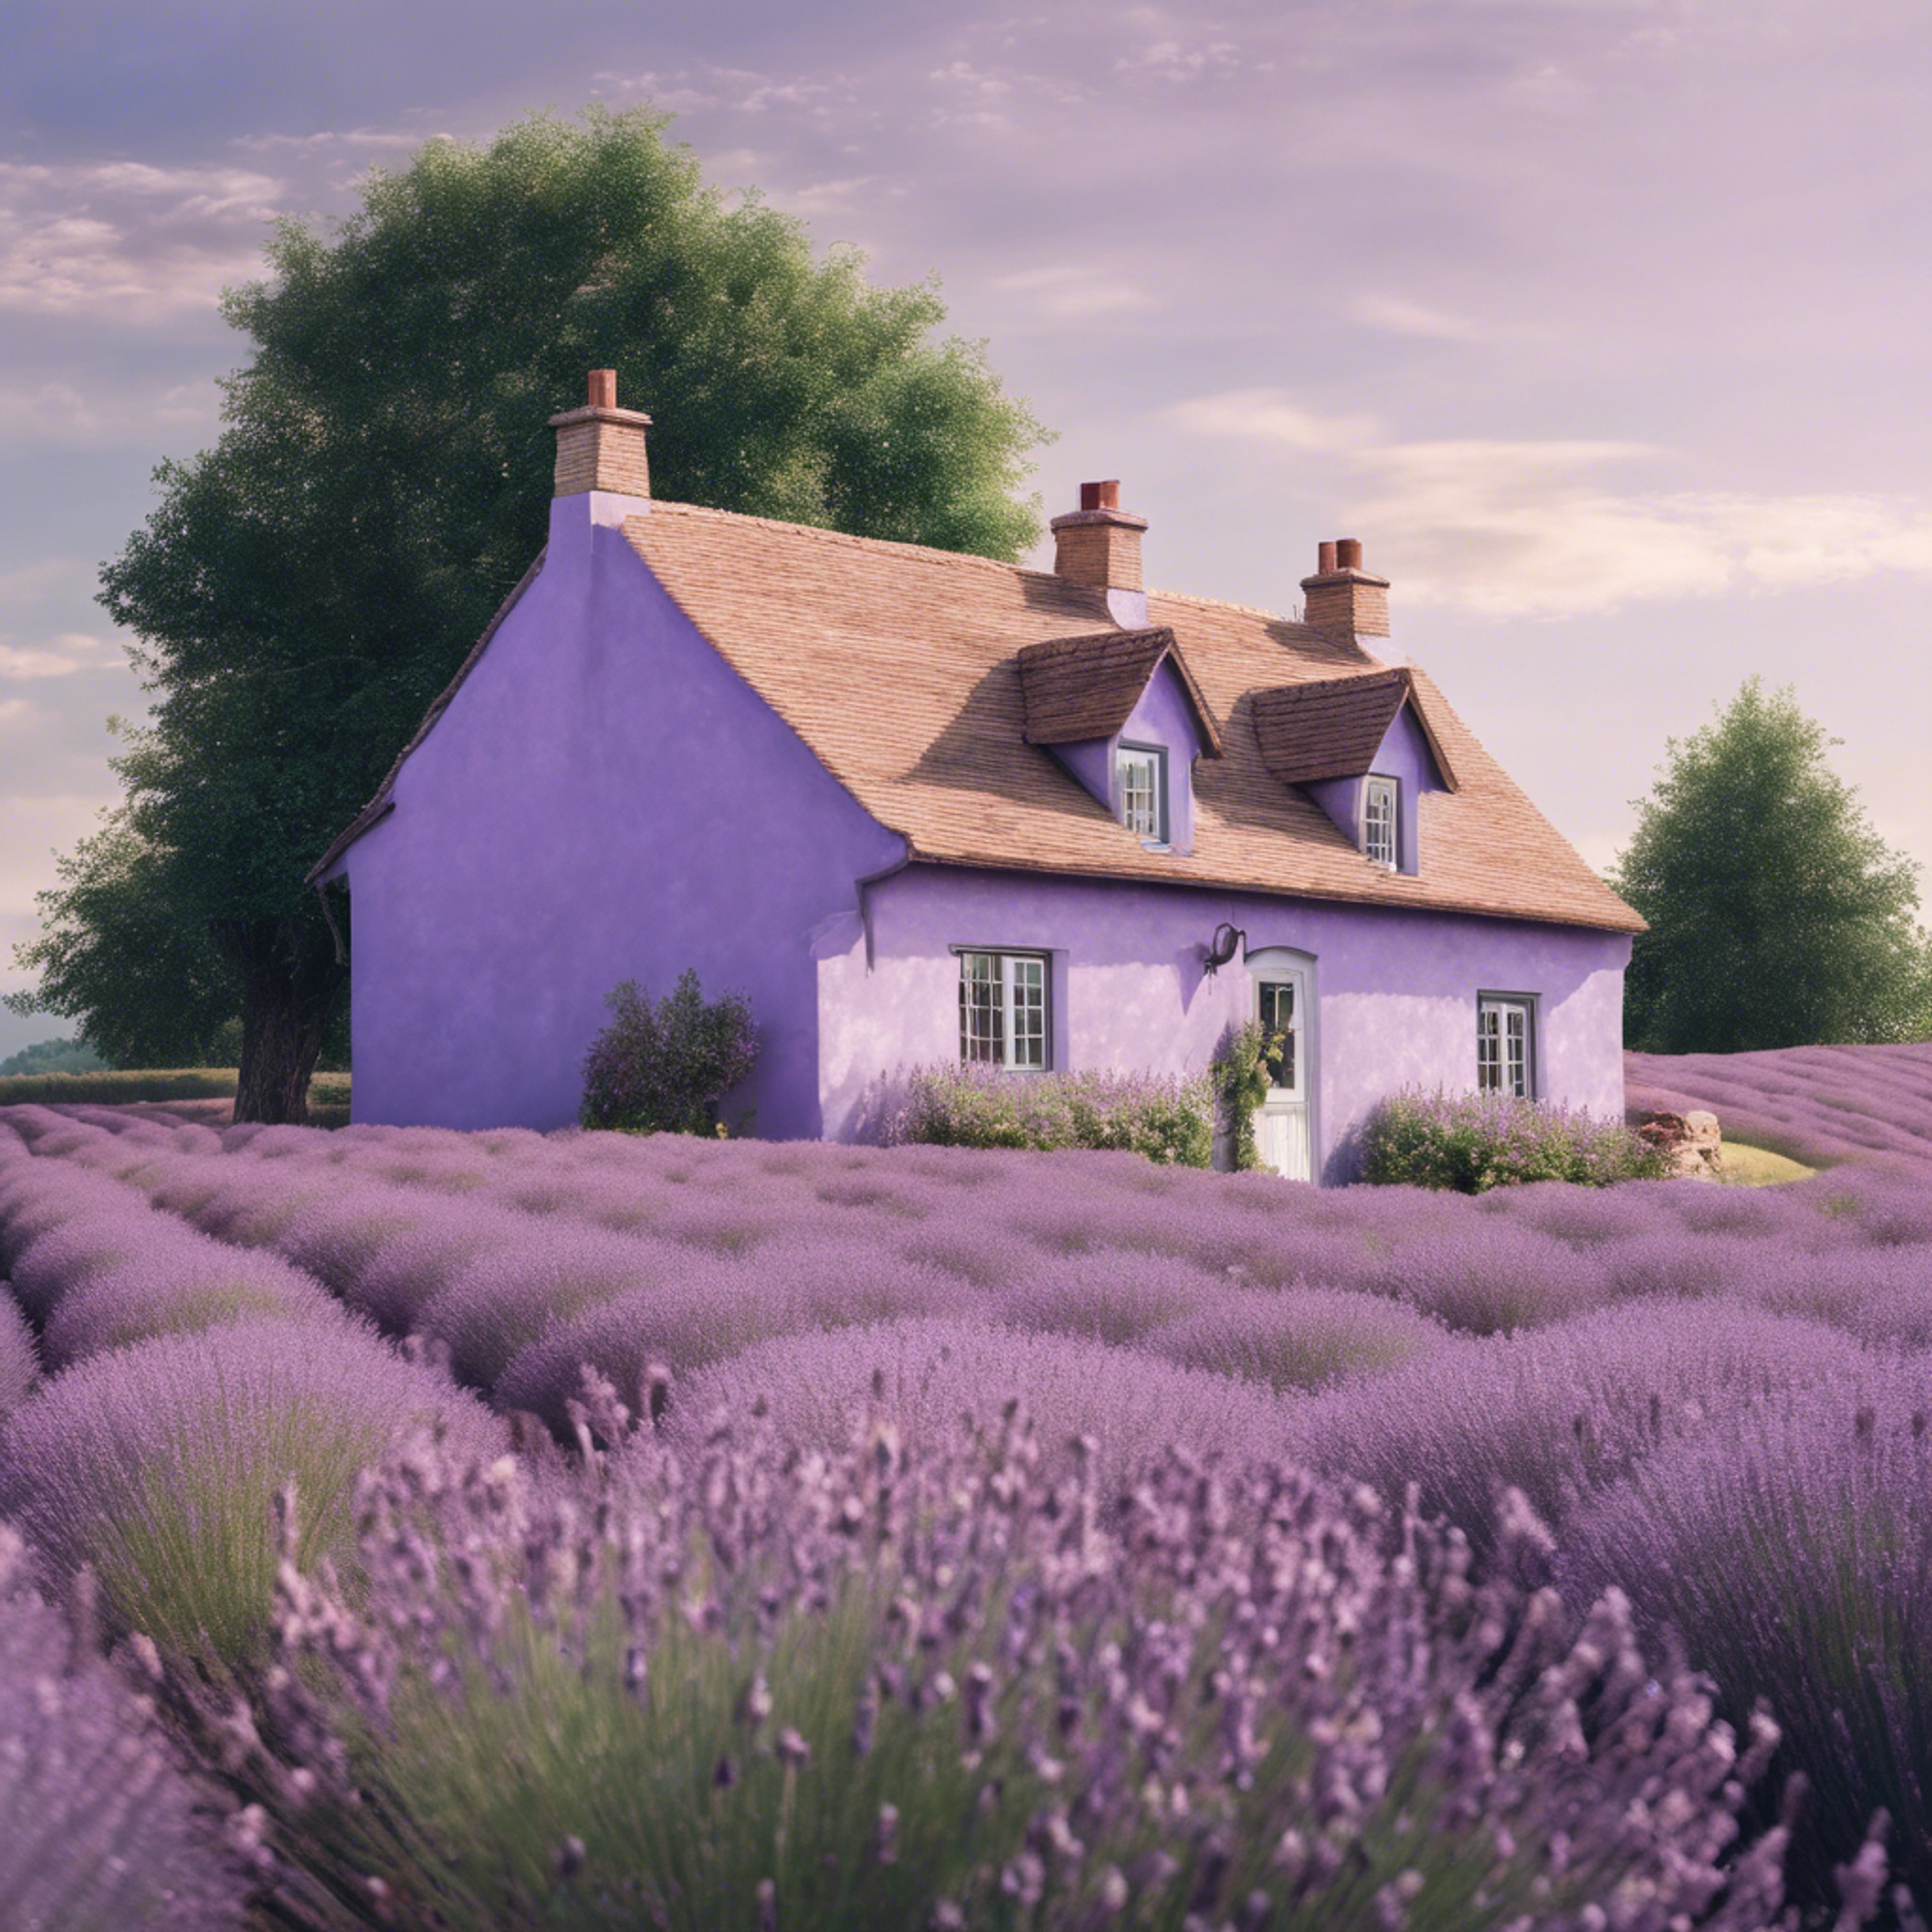 A quaint pastel purple cottage in the countryside surrounded by lavender fields. Tapeta[9ff1532238764d01813b]